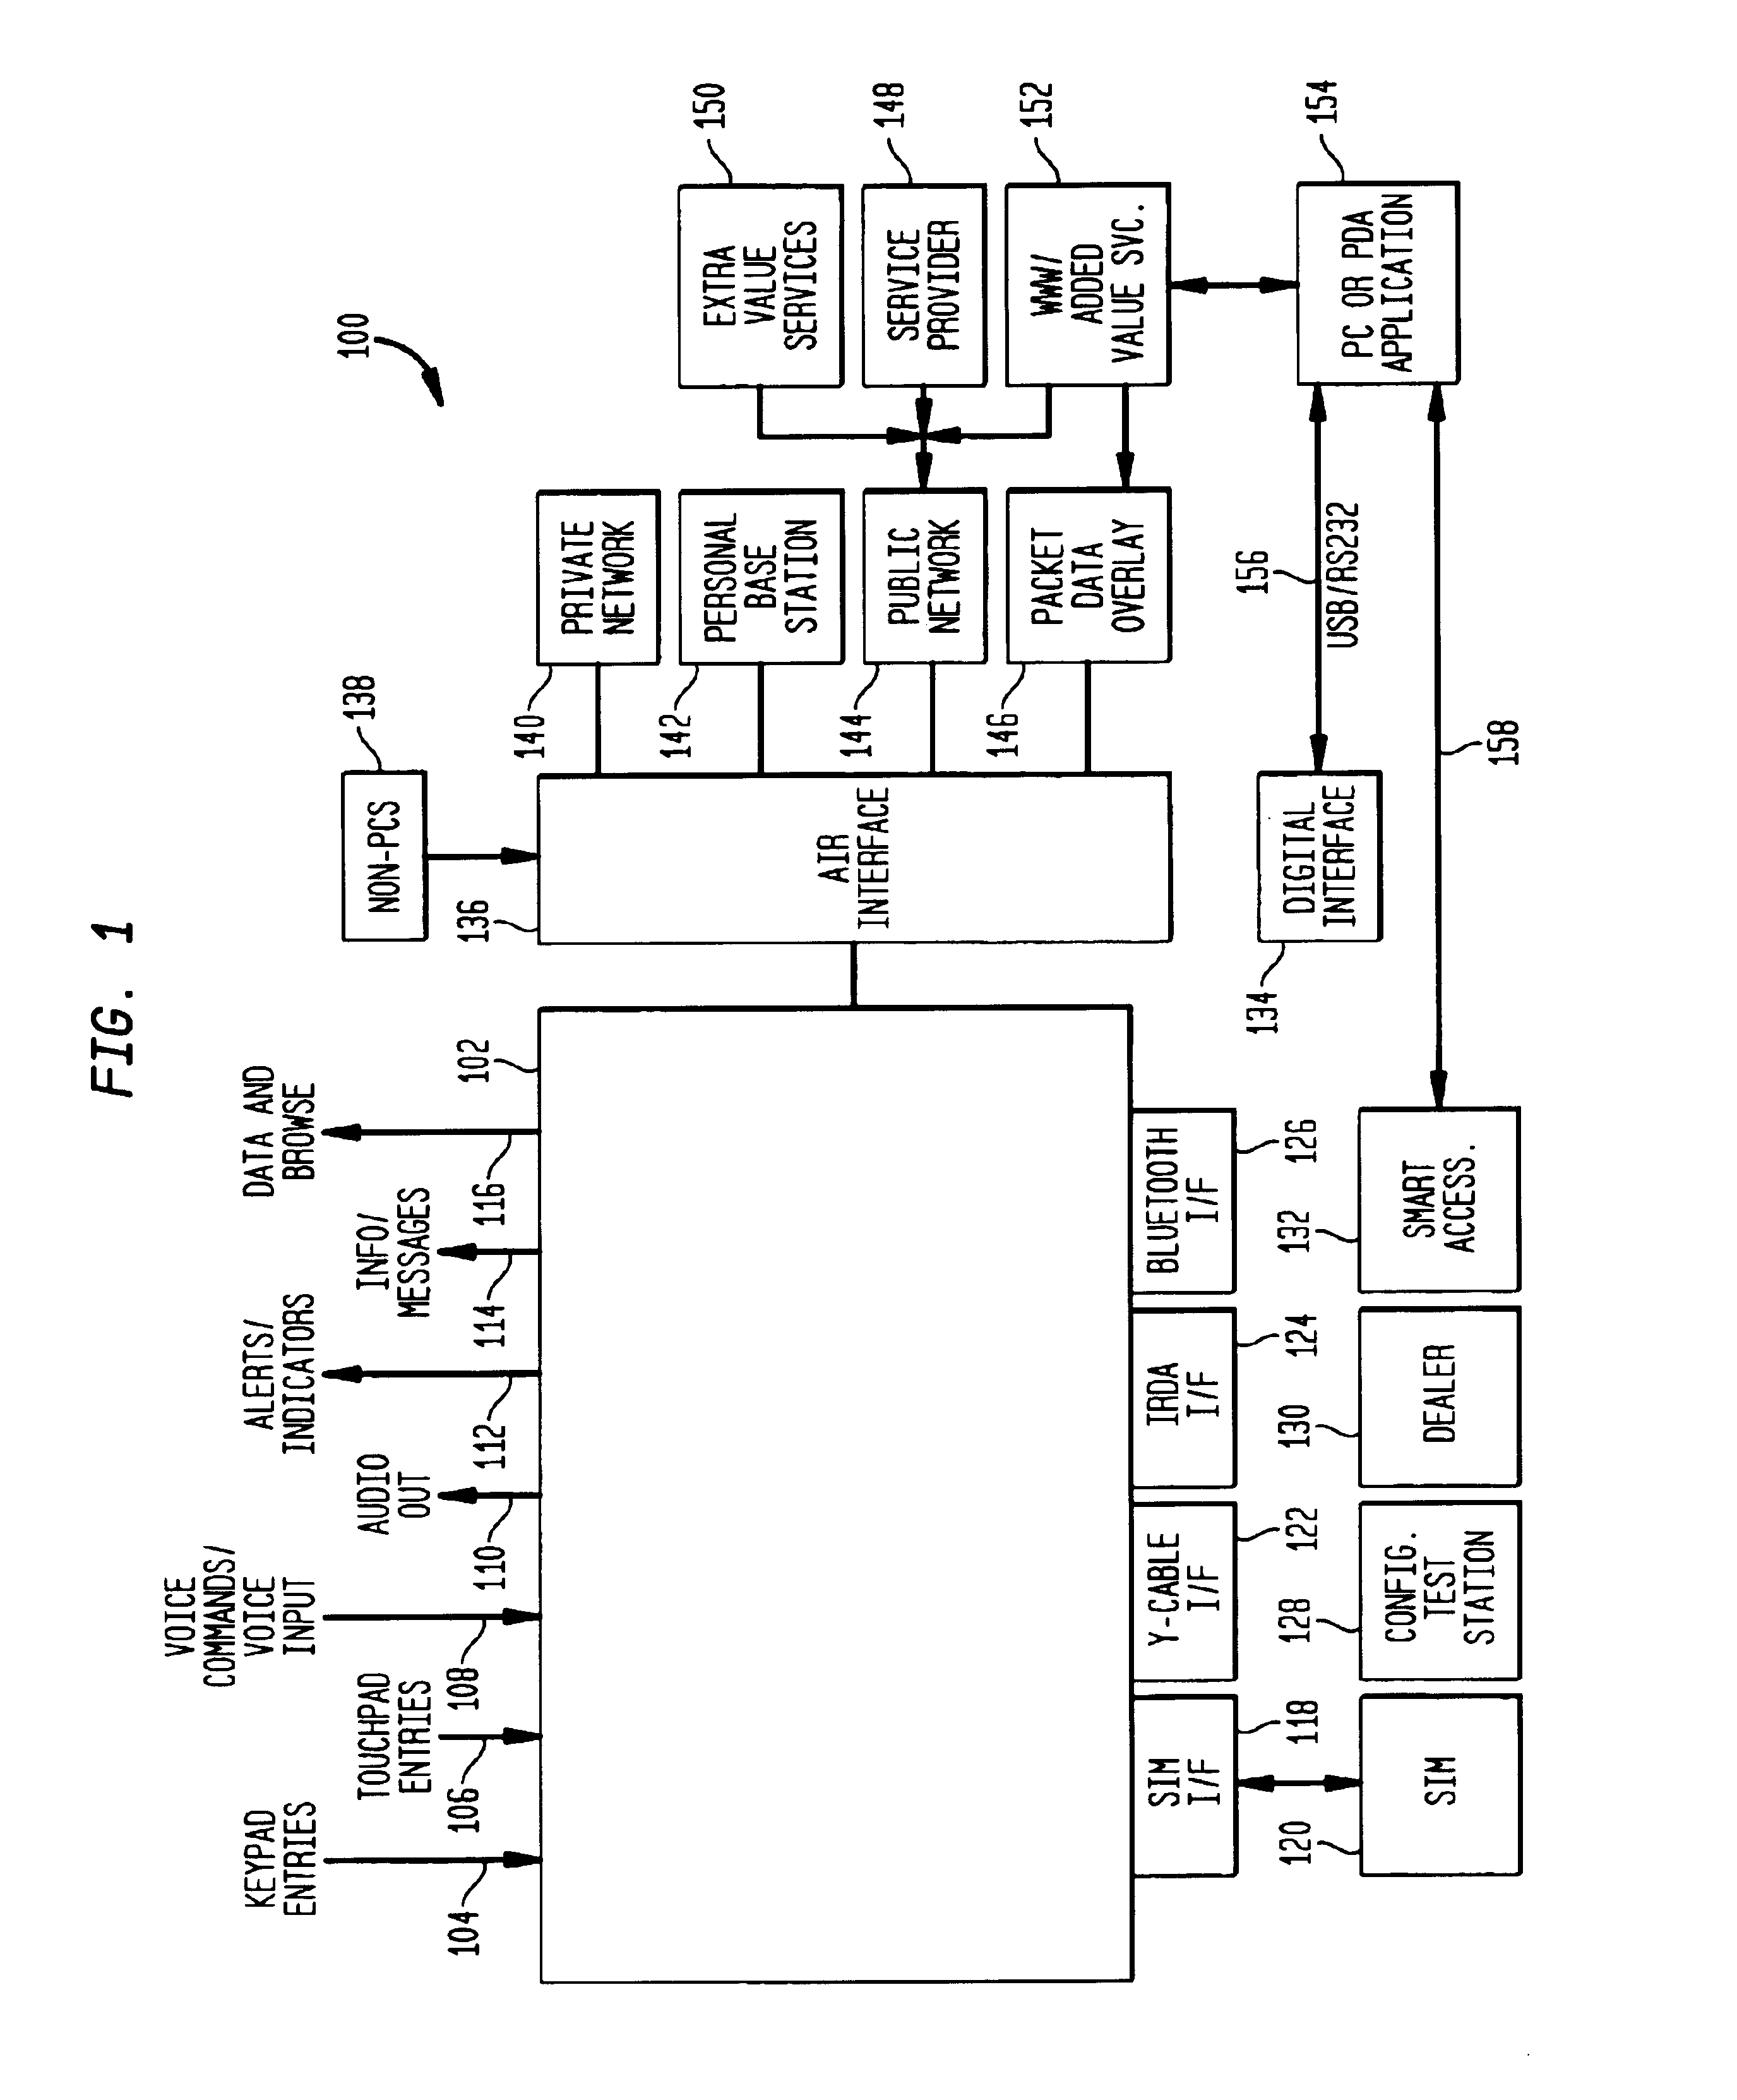 Methods and apparatus for modularization of real time and task oriented features in wireless communications